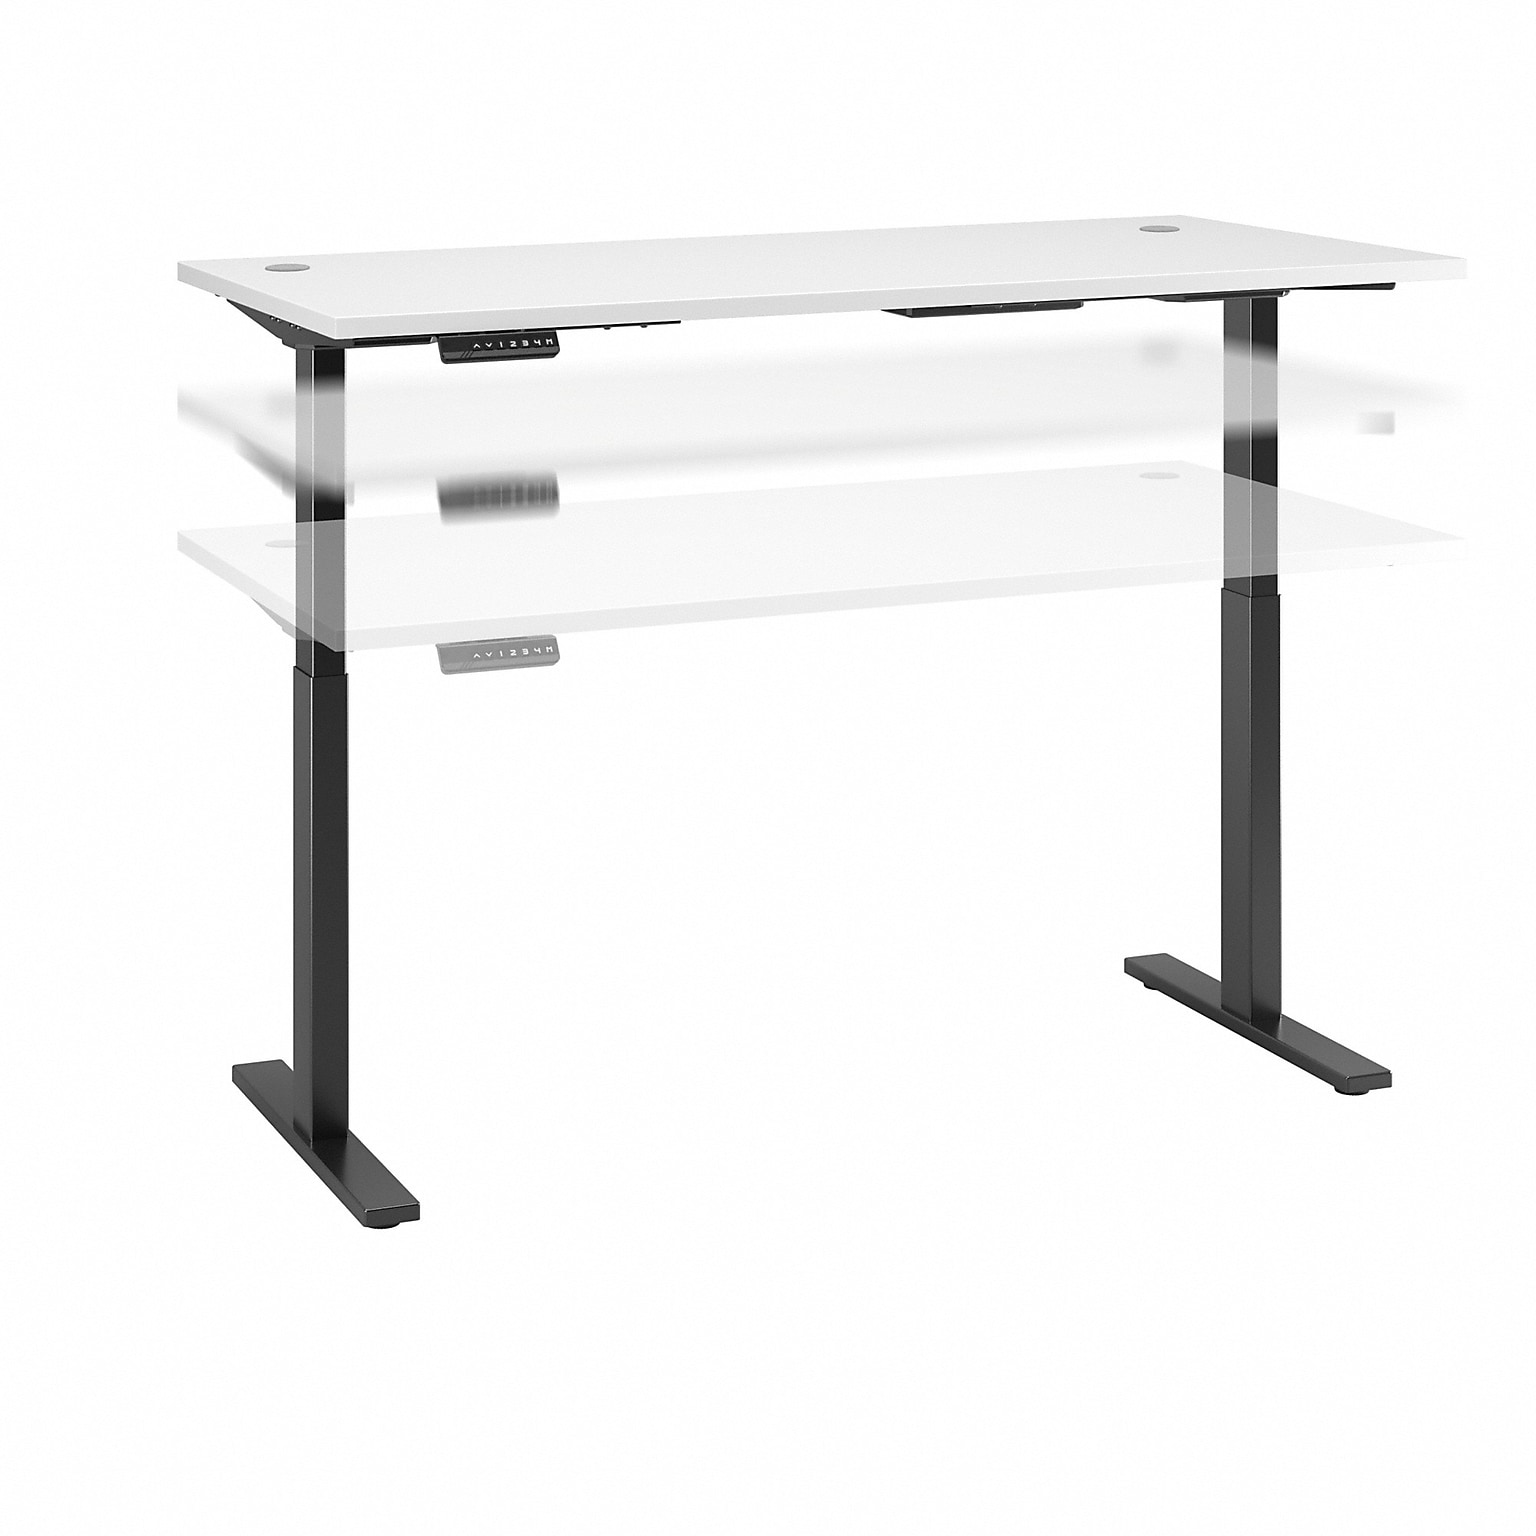 Bush Business Furniture Move 60 Series 72W Electric Height Adjustable Standing Desk, White (M6S7230WHBK)